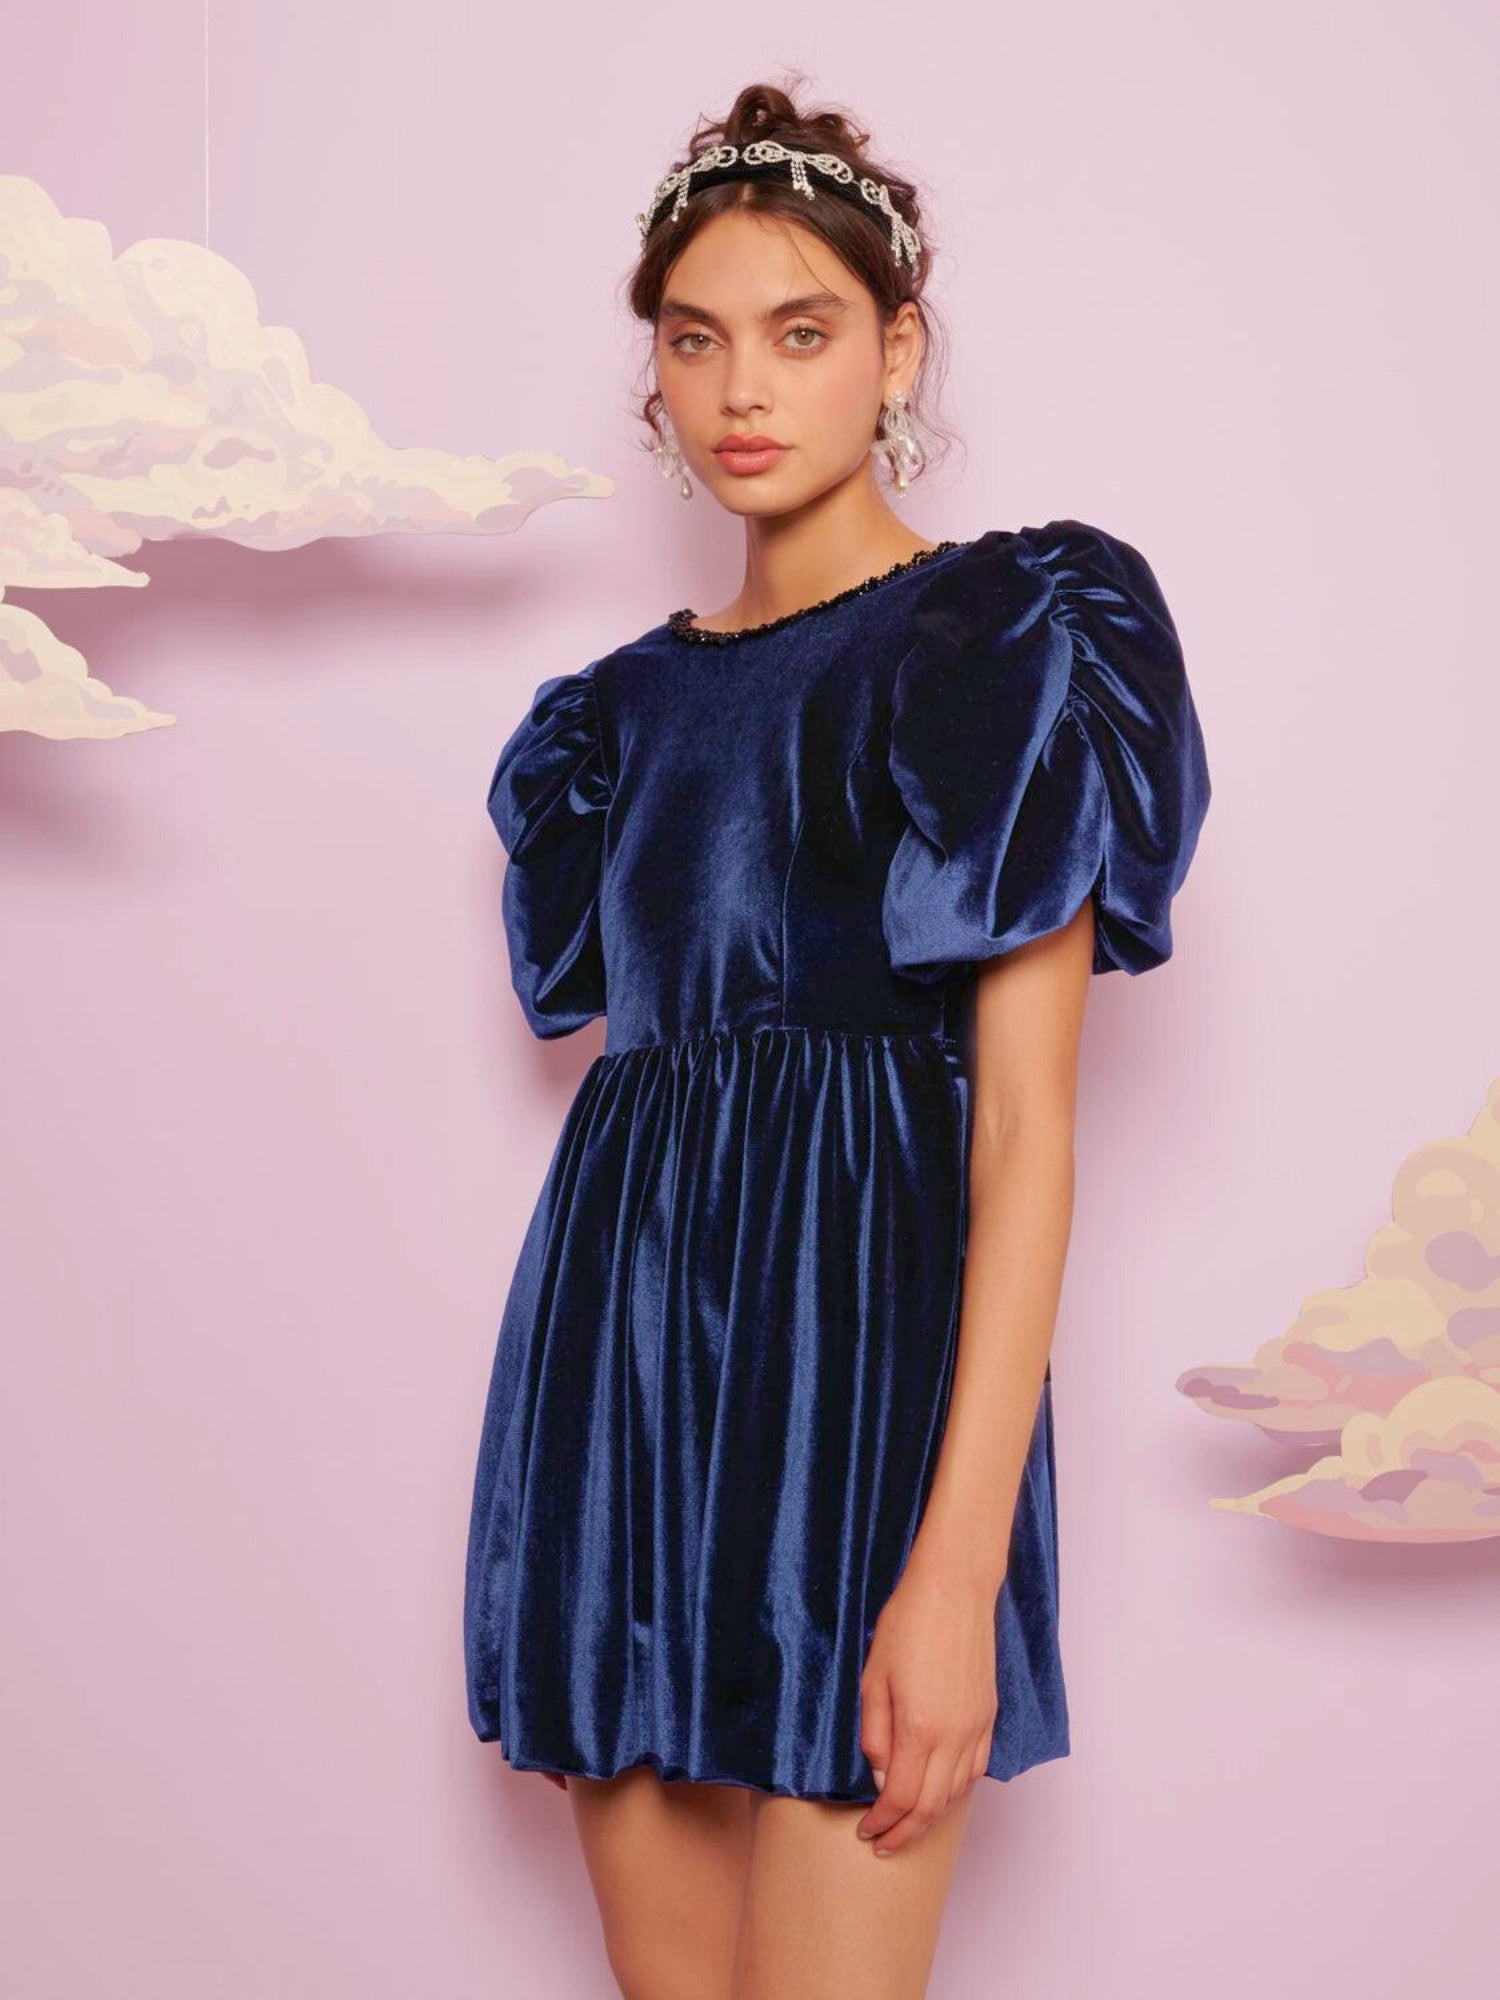 Spell Velvet Mini Dress - The Spell Velvet mini dress by SisterJane is the ultimate holiday dress! The softest blue velvet piece, with a deep V back neckline framed with black pearls, and puff sleeves. This piece features a bubble hem and is lined with a